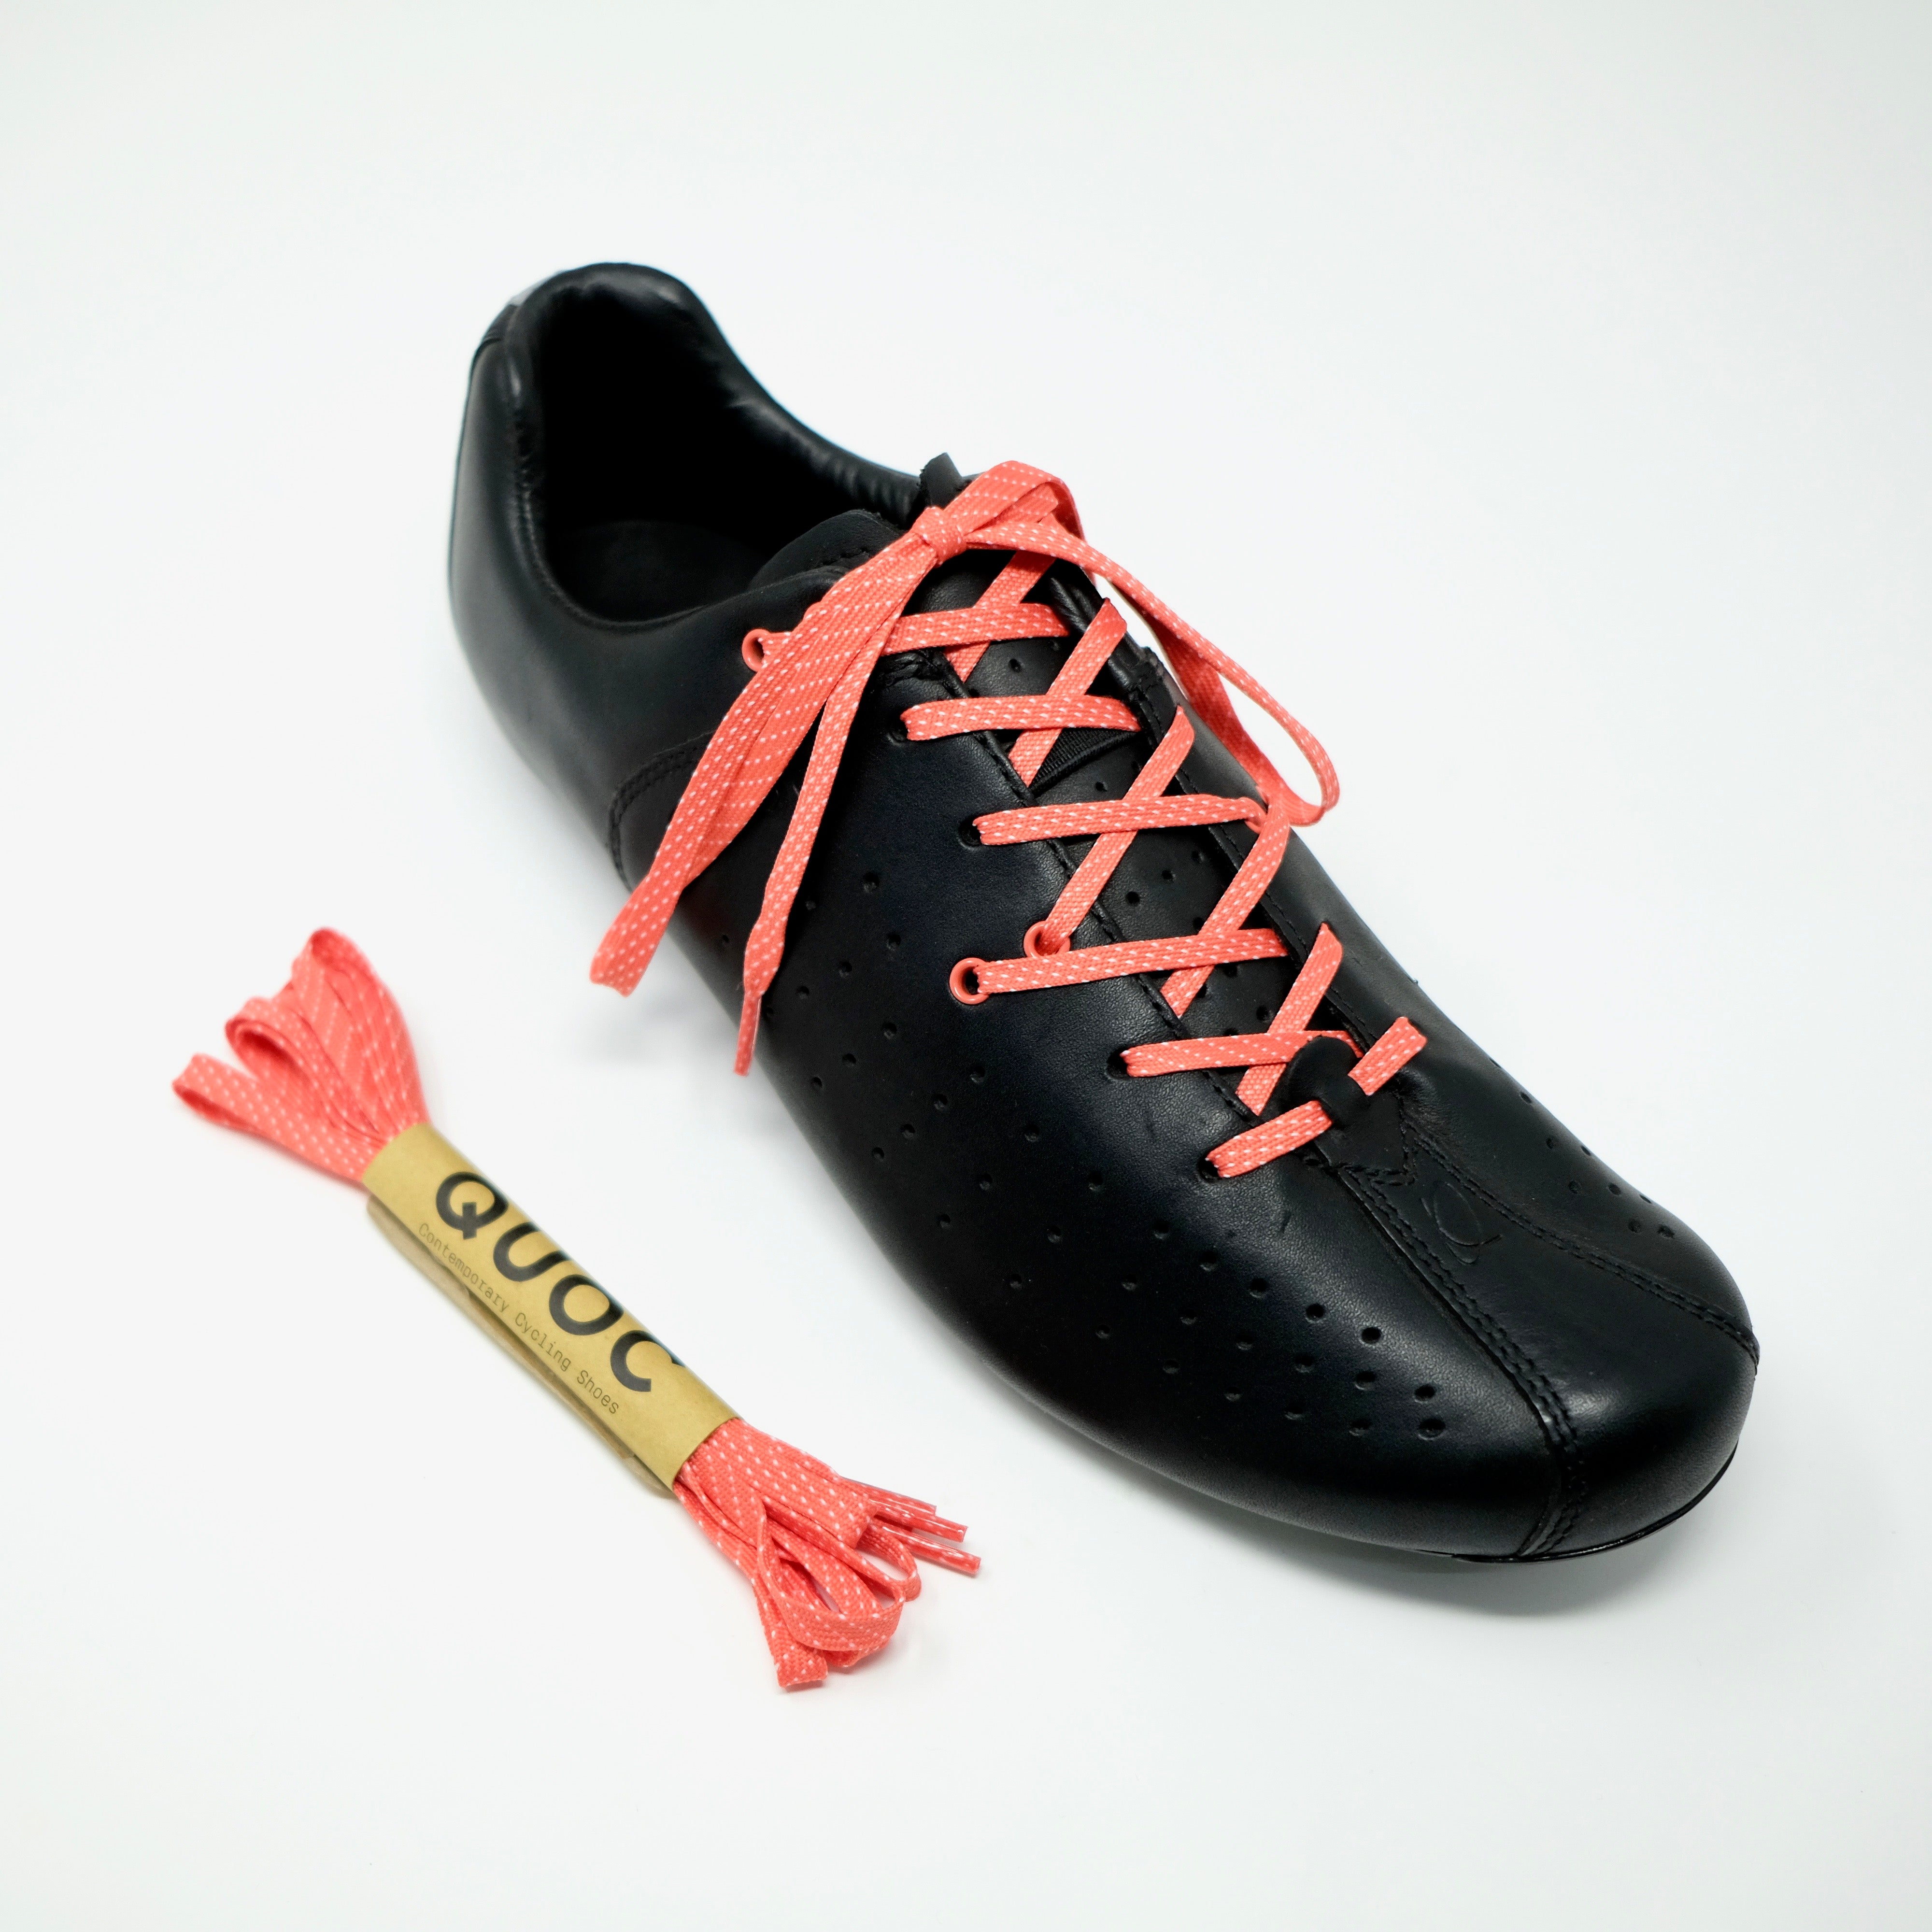 QUOCPHAM Candy Shoelace